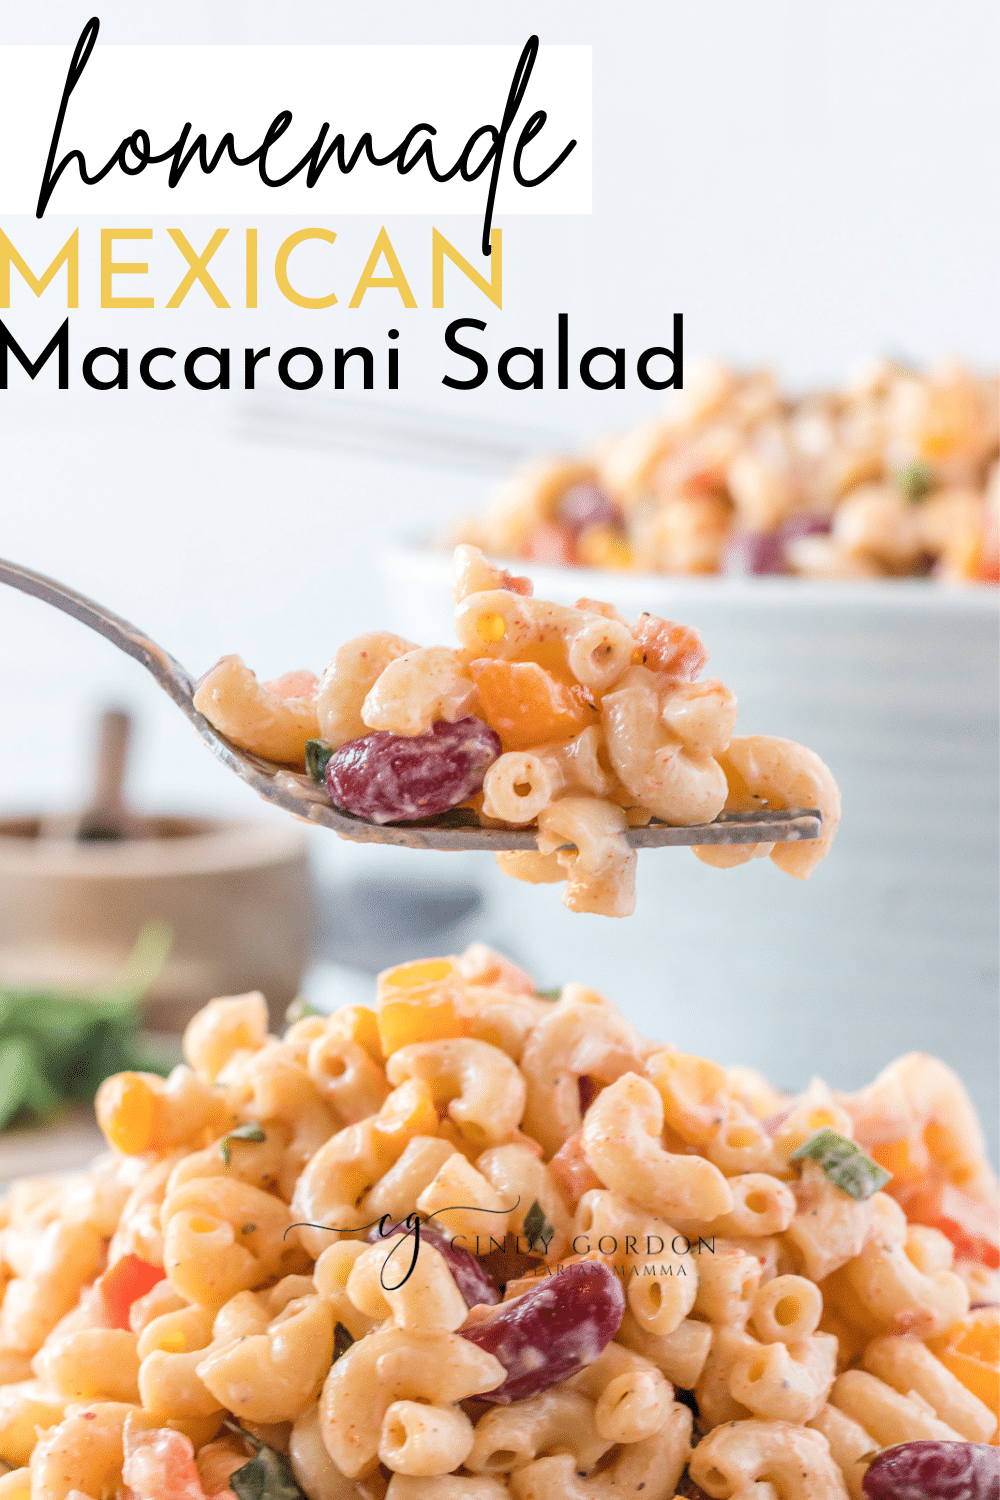 Mexican Macaroni Salad is a crowd pleaser! You will love the crunch and the creaminess this macaroni salad brings to the table! This Mexican Macaroni Salad is packed with colorful and flavorful veggies. | Macaroni Salad | Mexican Recipe